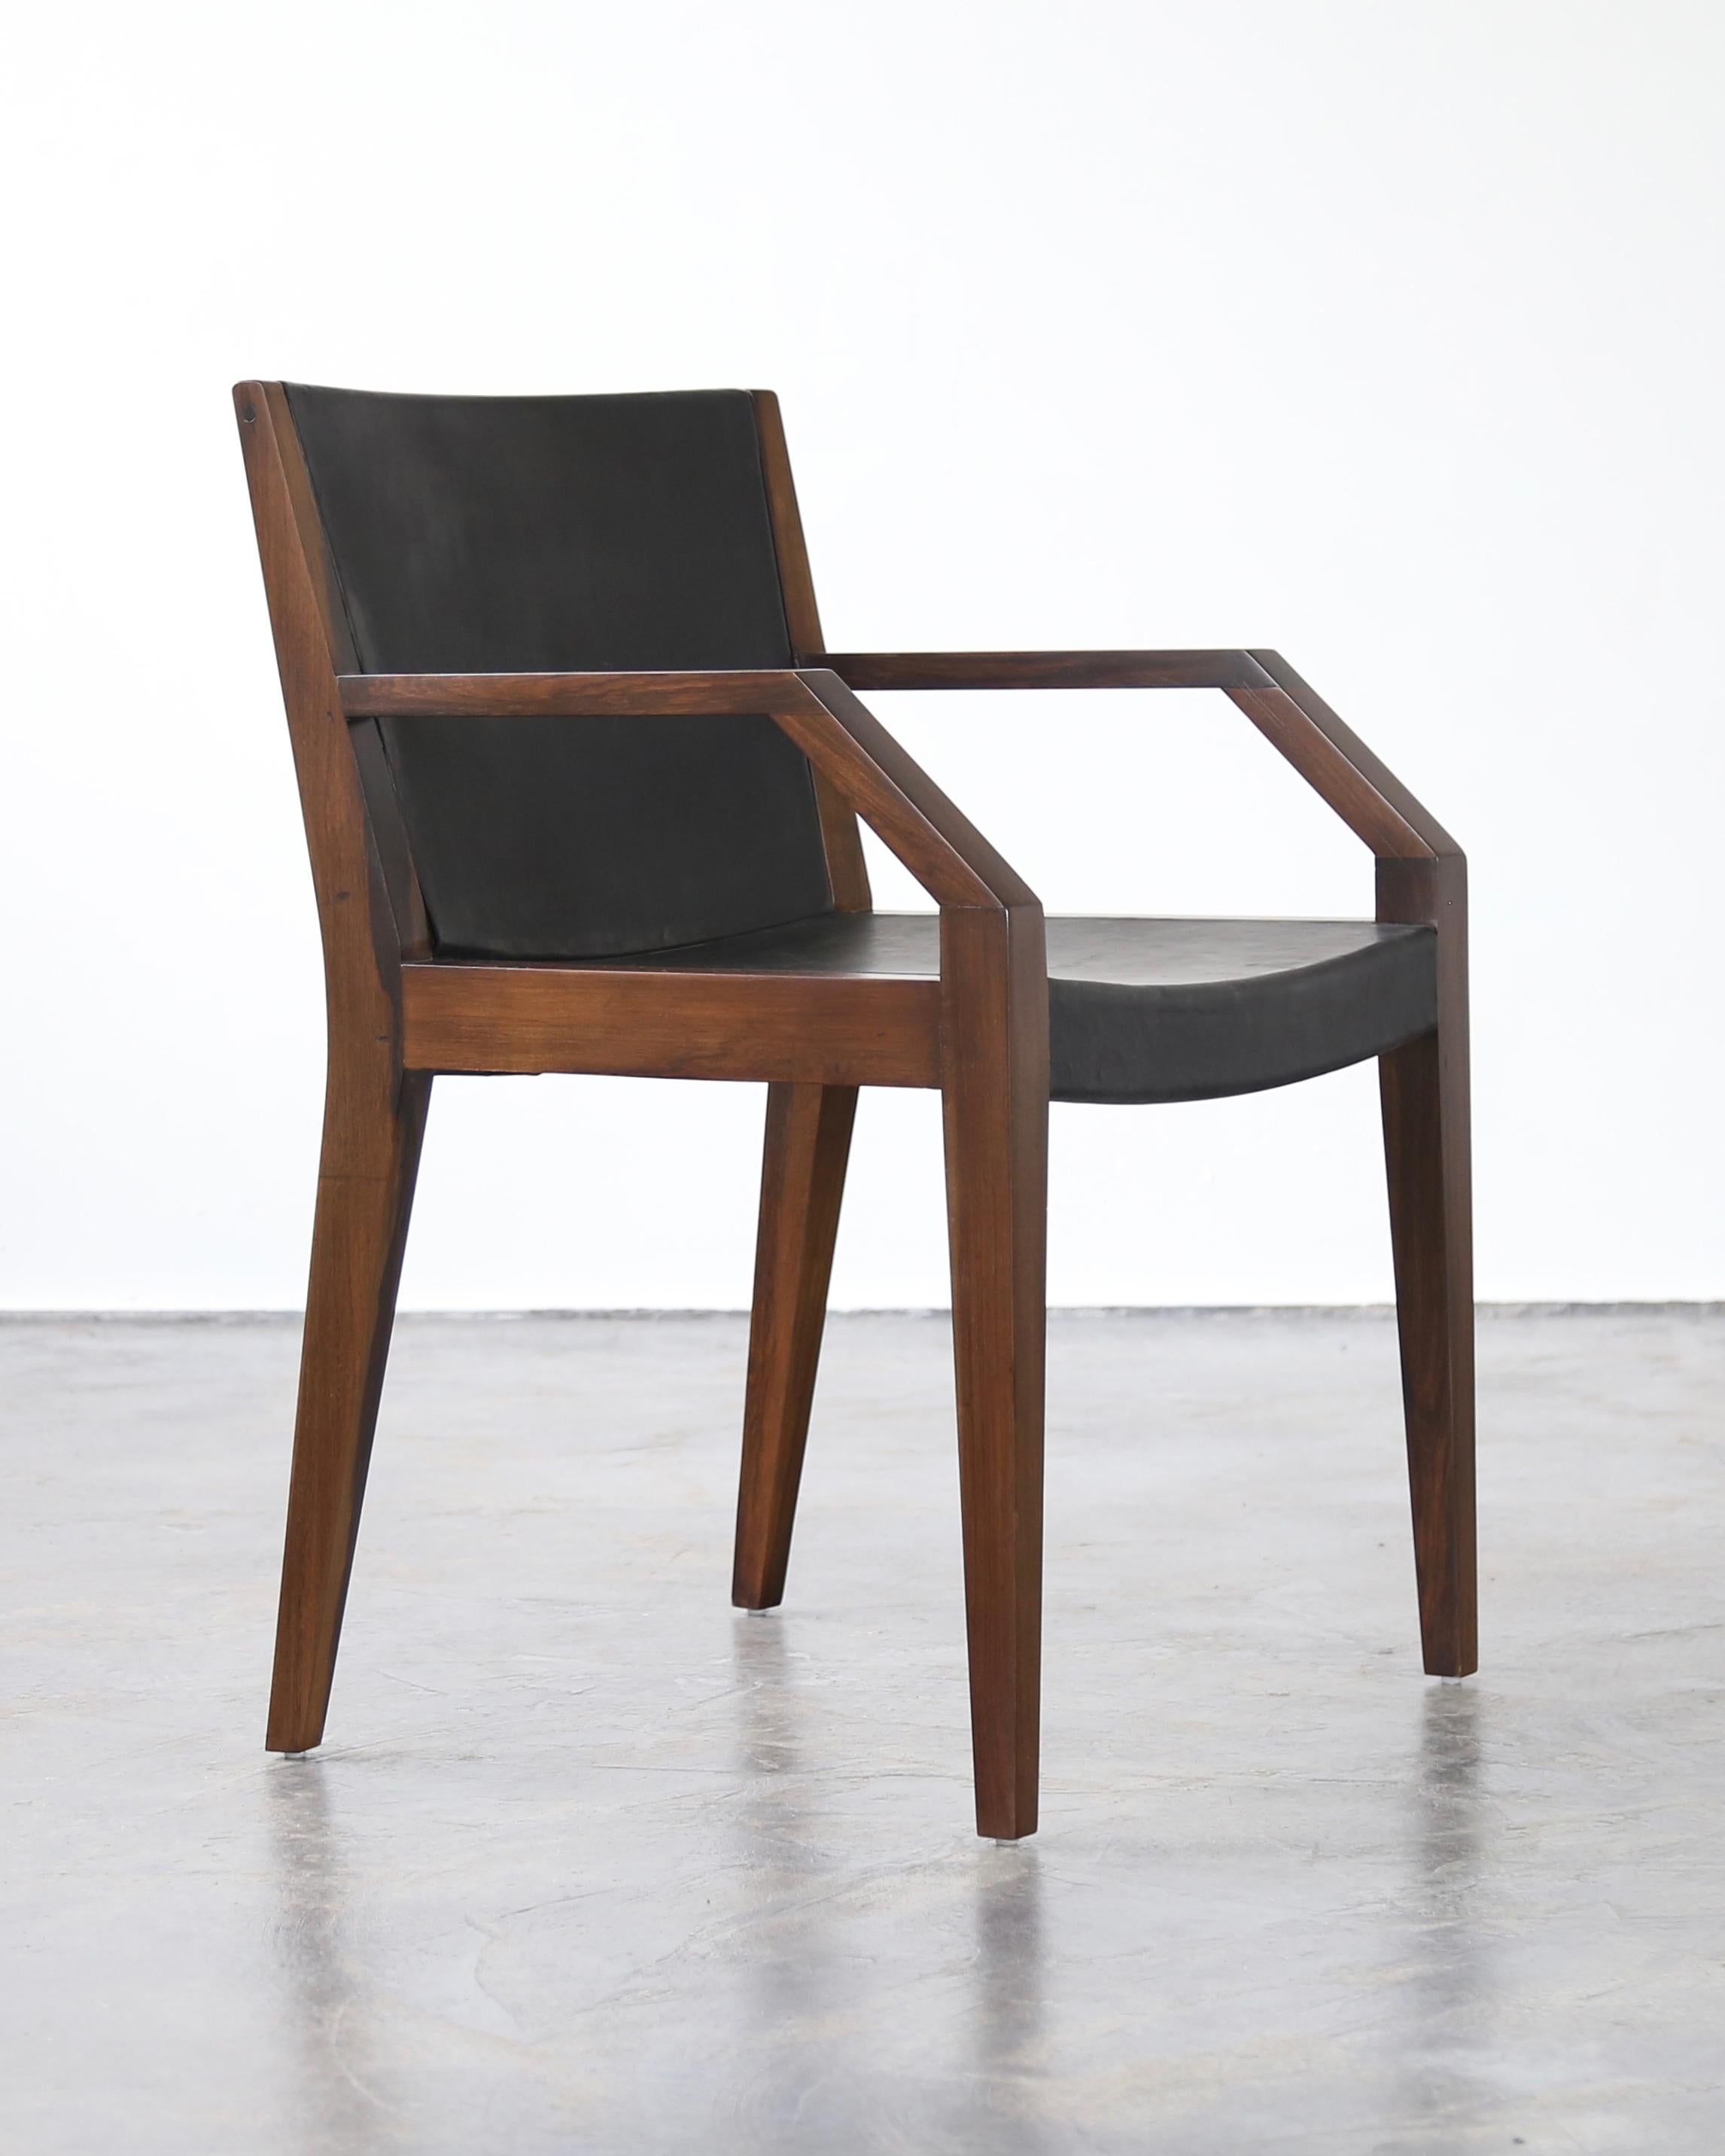 Giovanni Contemporary Armchair in Exotic Wood and Wrapped Leather by Costantini

Measurements are: 23